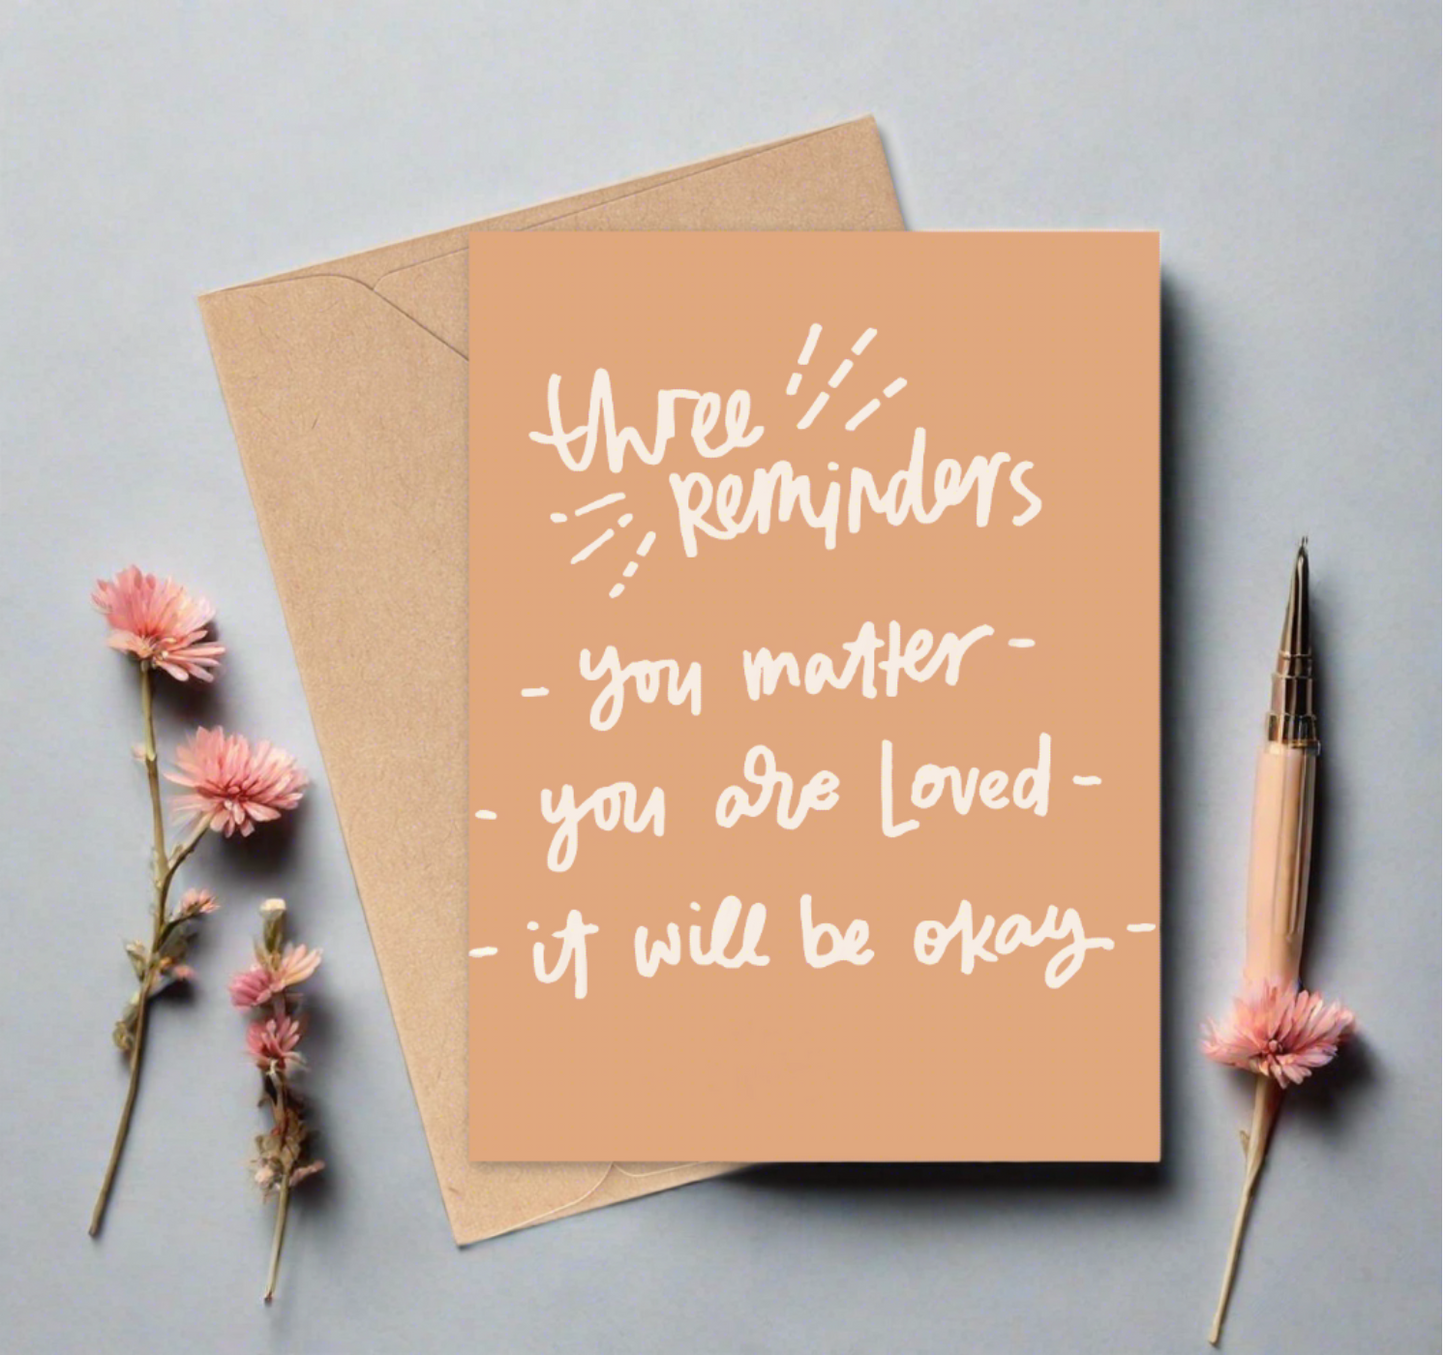 Three empowerment reminders - you matter, you are loved, it will be okay greeting card with envelope